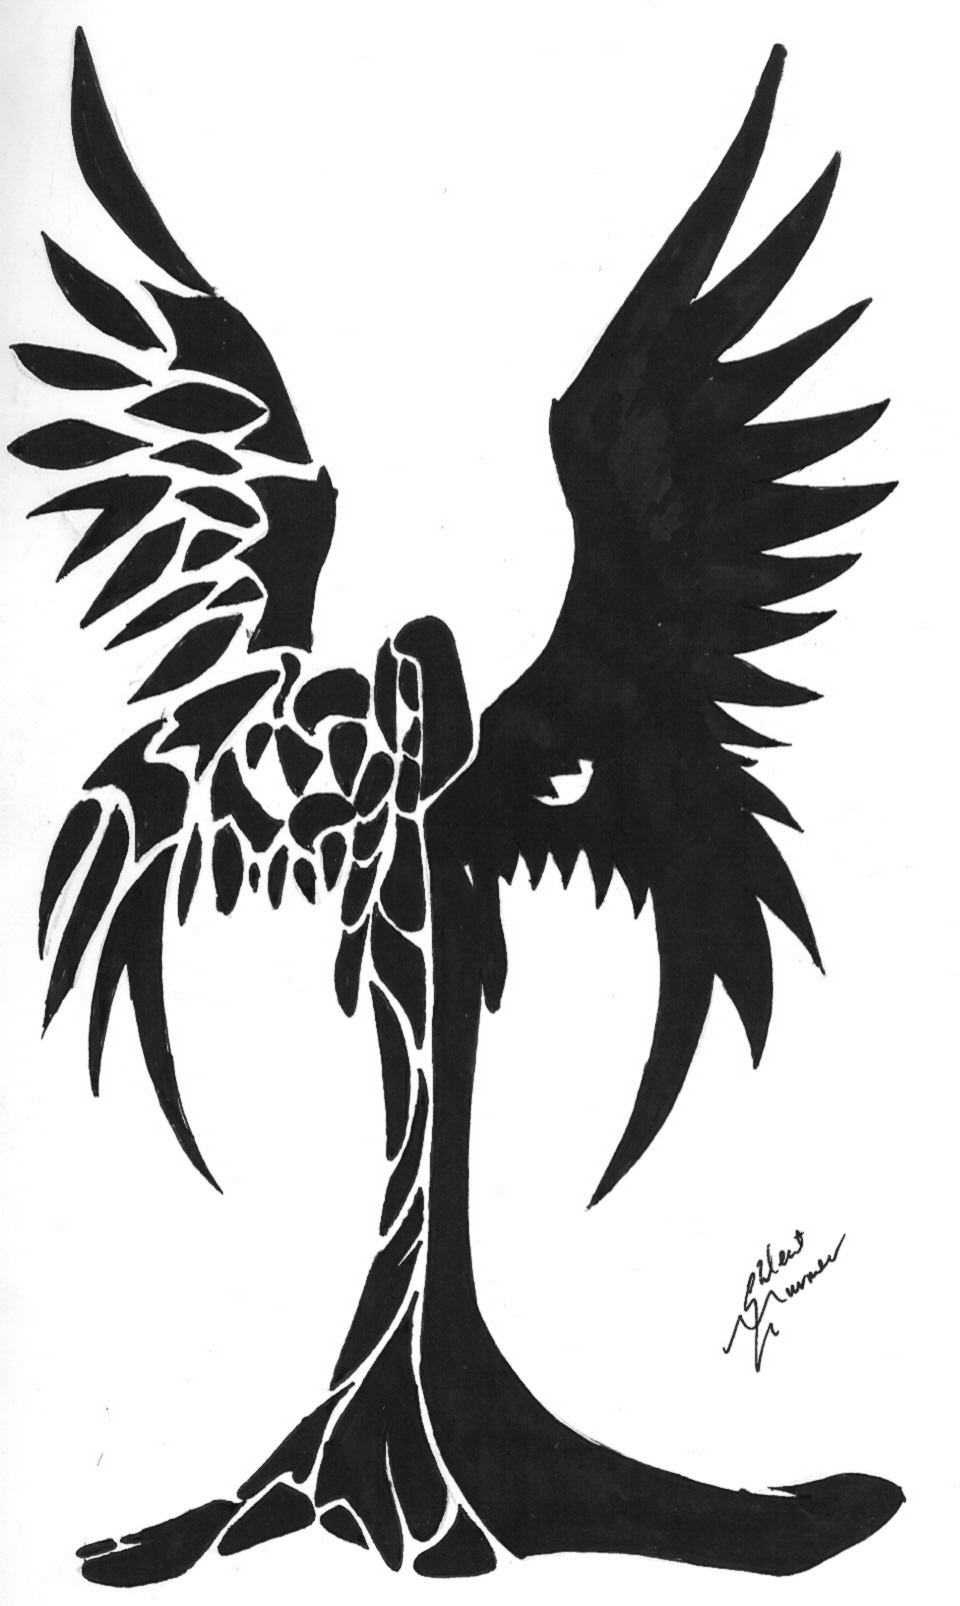 Four-winged Stencil Angel by silent-murmer on DeviantArt